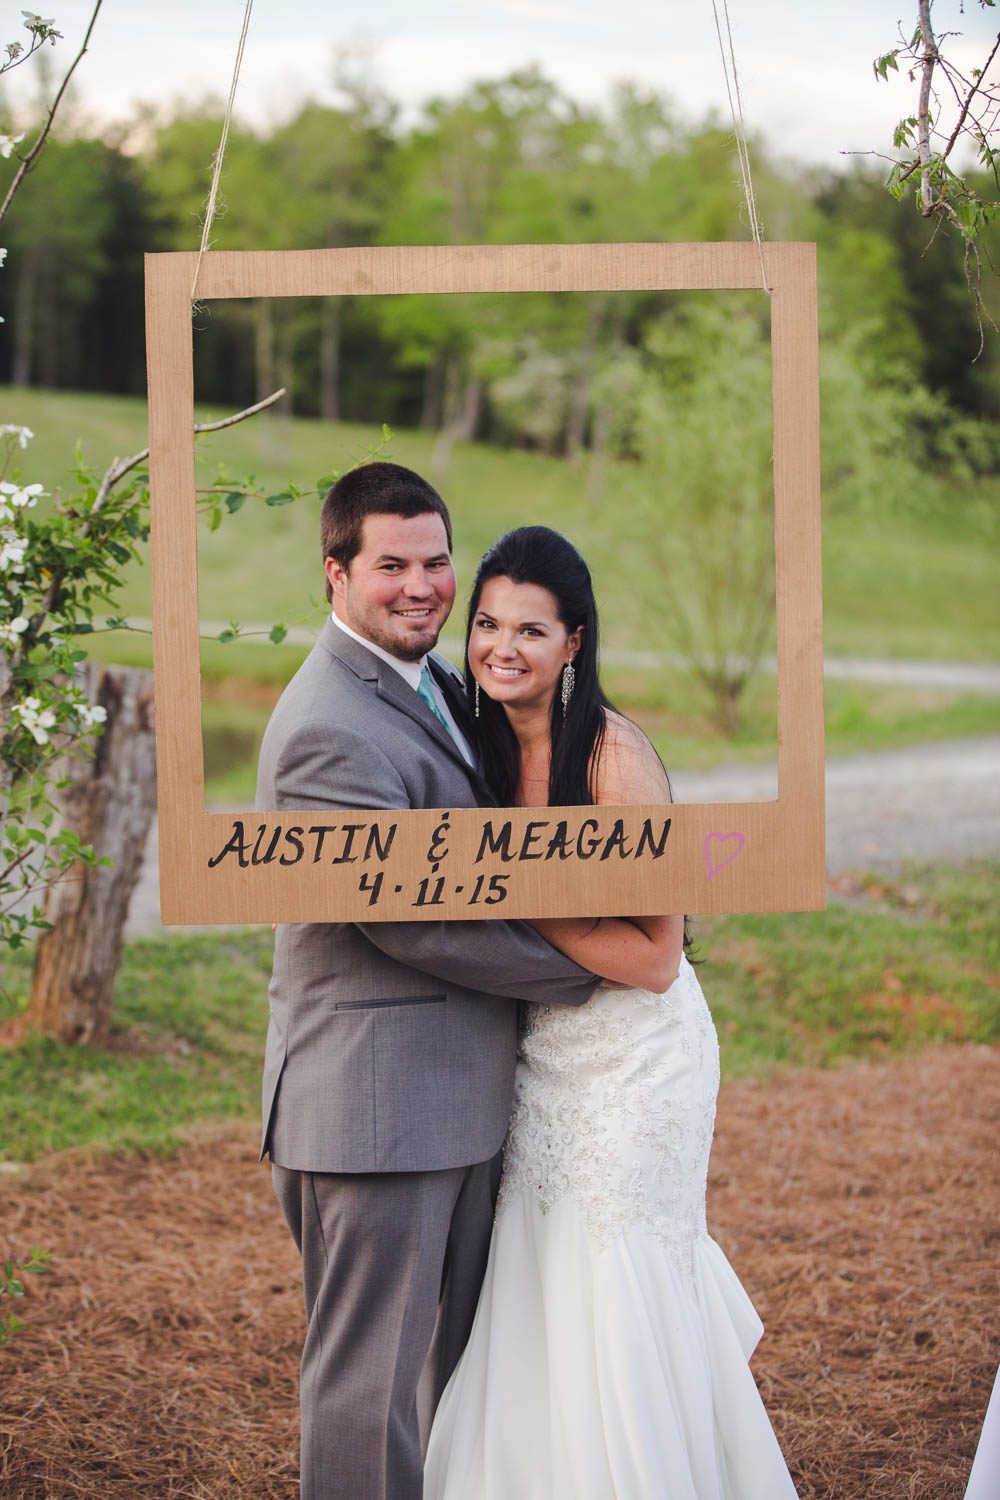 Rich Bell Photography | Meagan and Austin